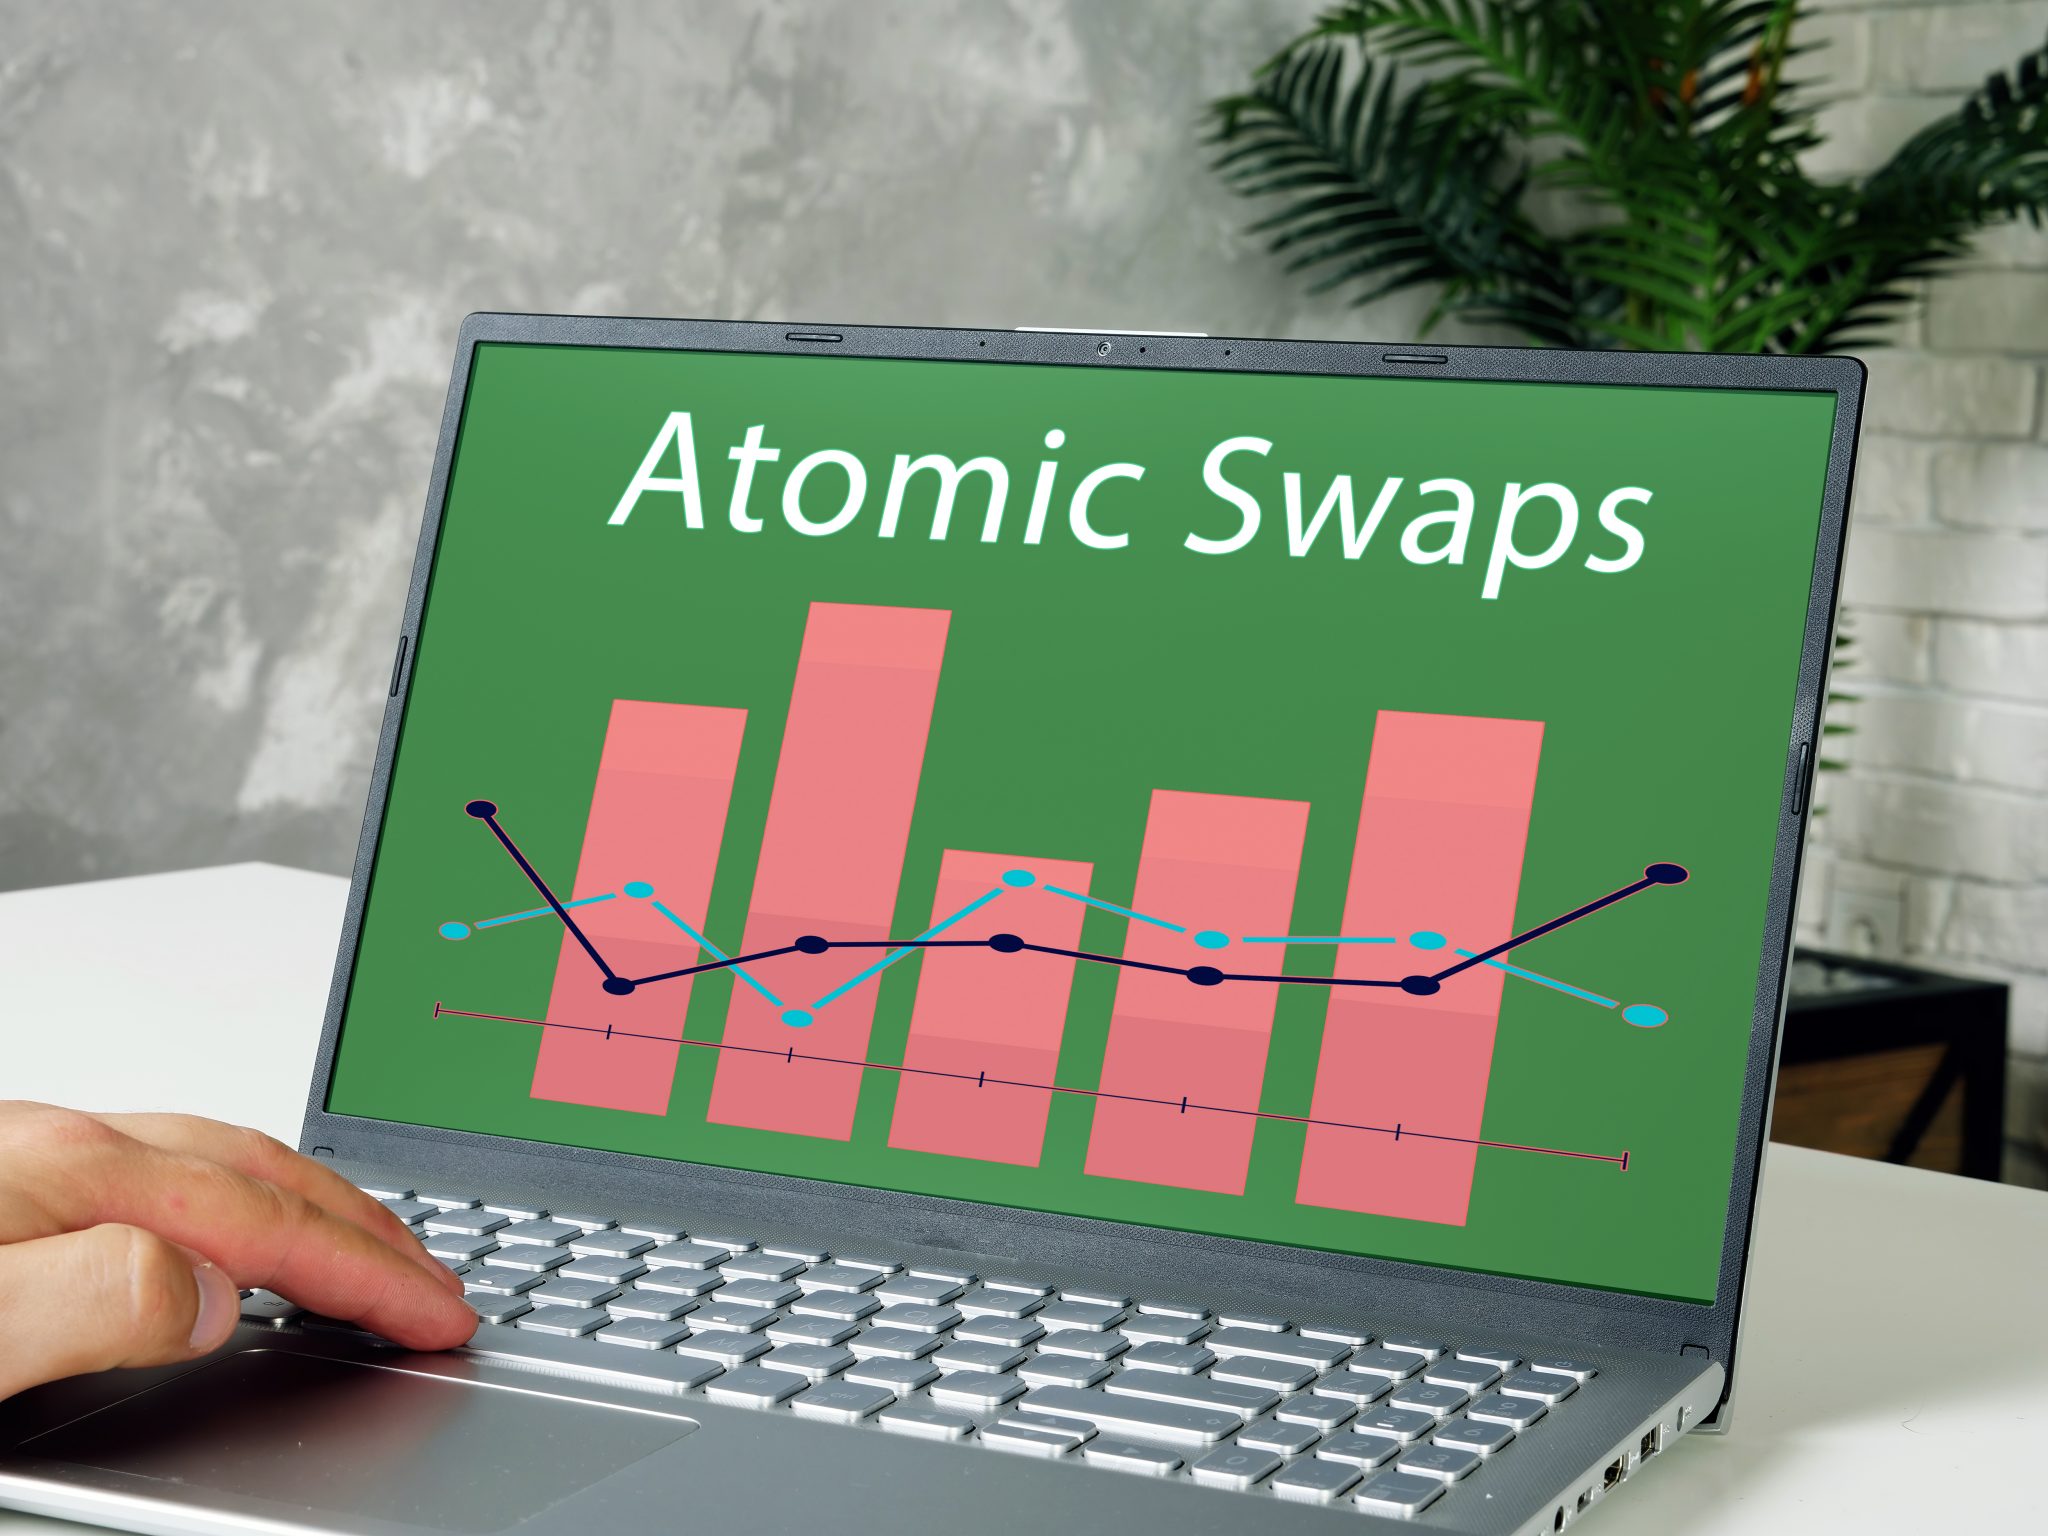 Atomic Swaps sign on the piece of paper